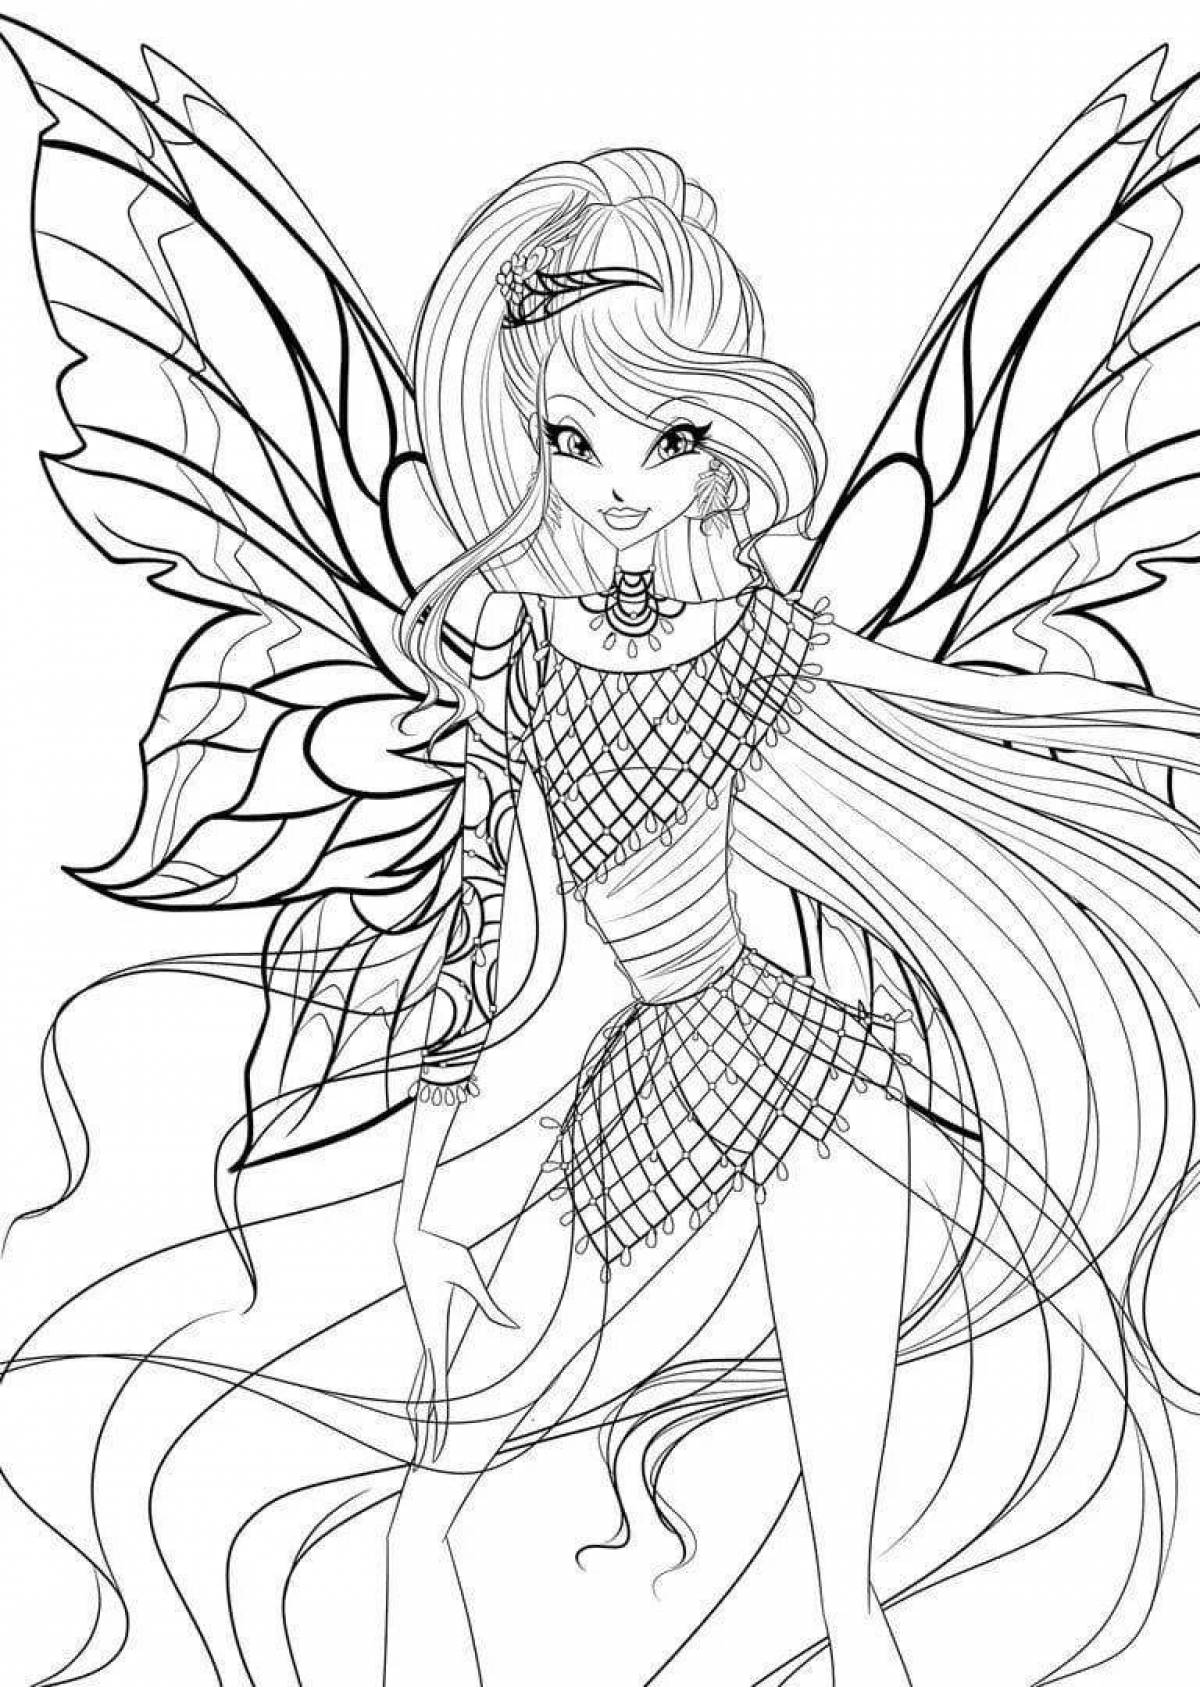 Fancy coloring world of winx